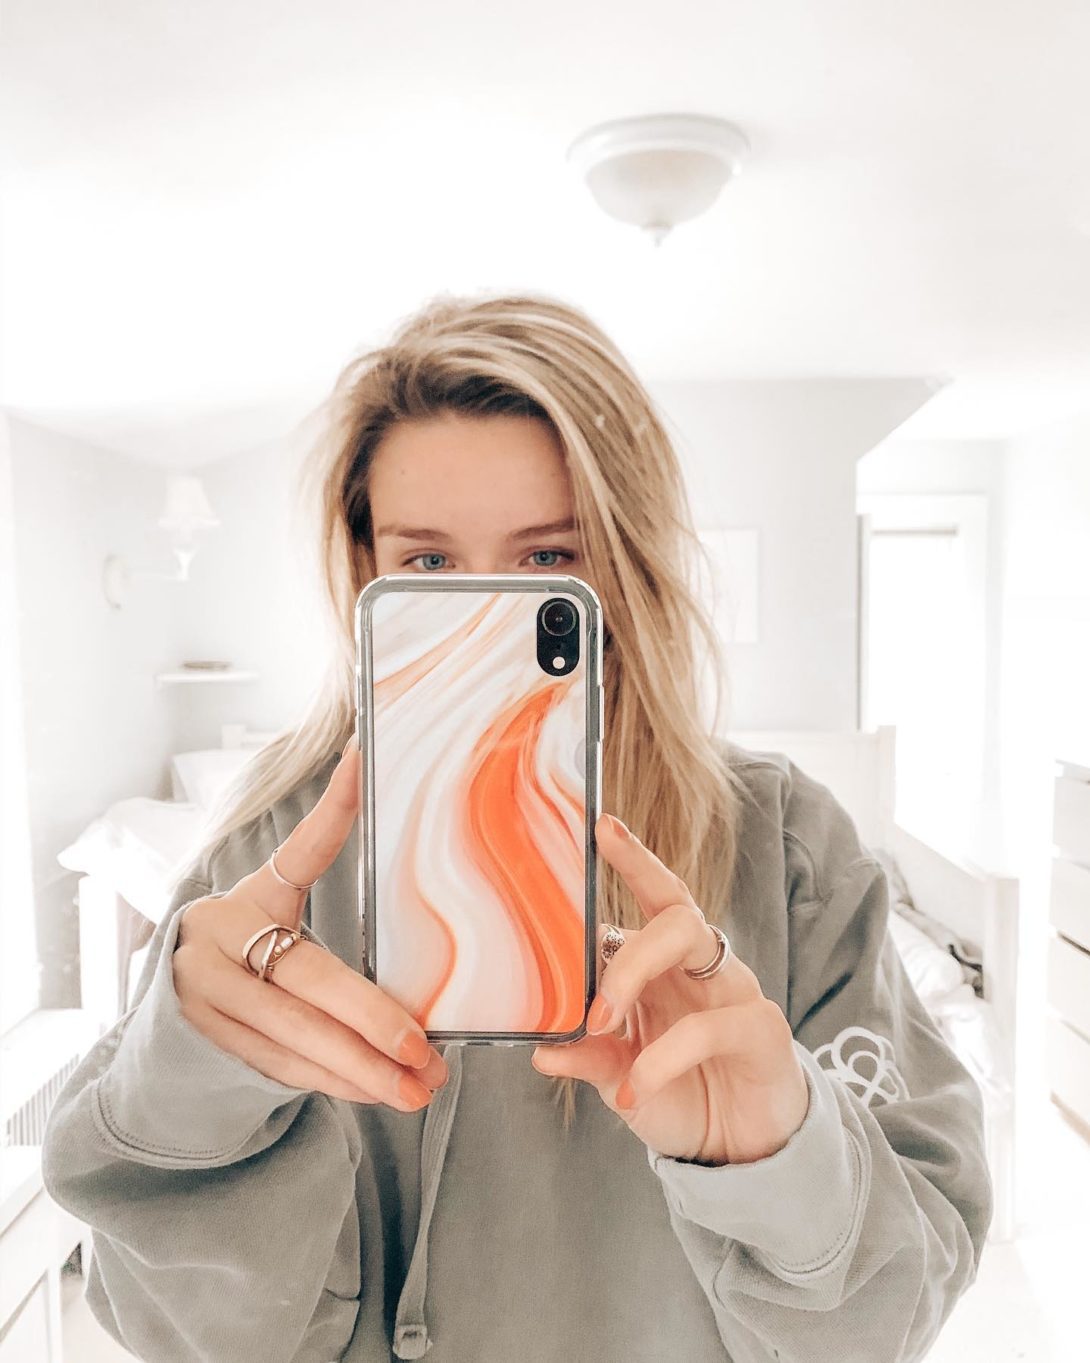 Spring is here and that means new case designs like this Orange Creamsicle Marble Design Find it in our Marble category at casesbykatecom | Phone Cases